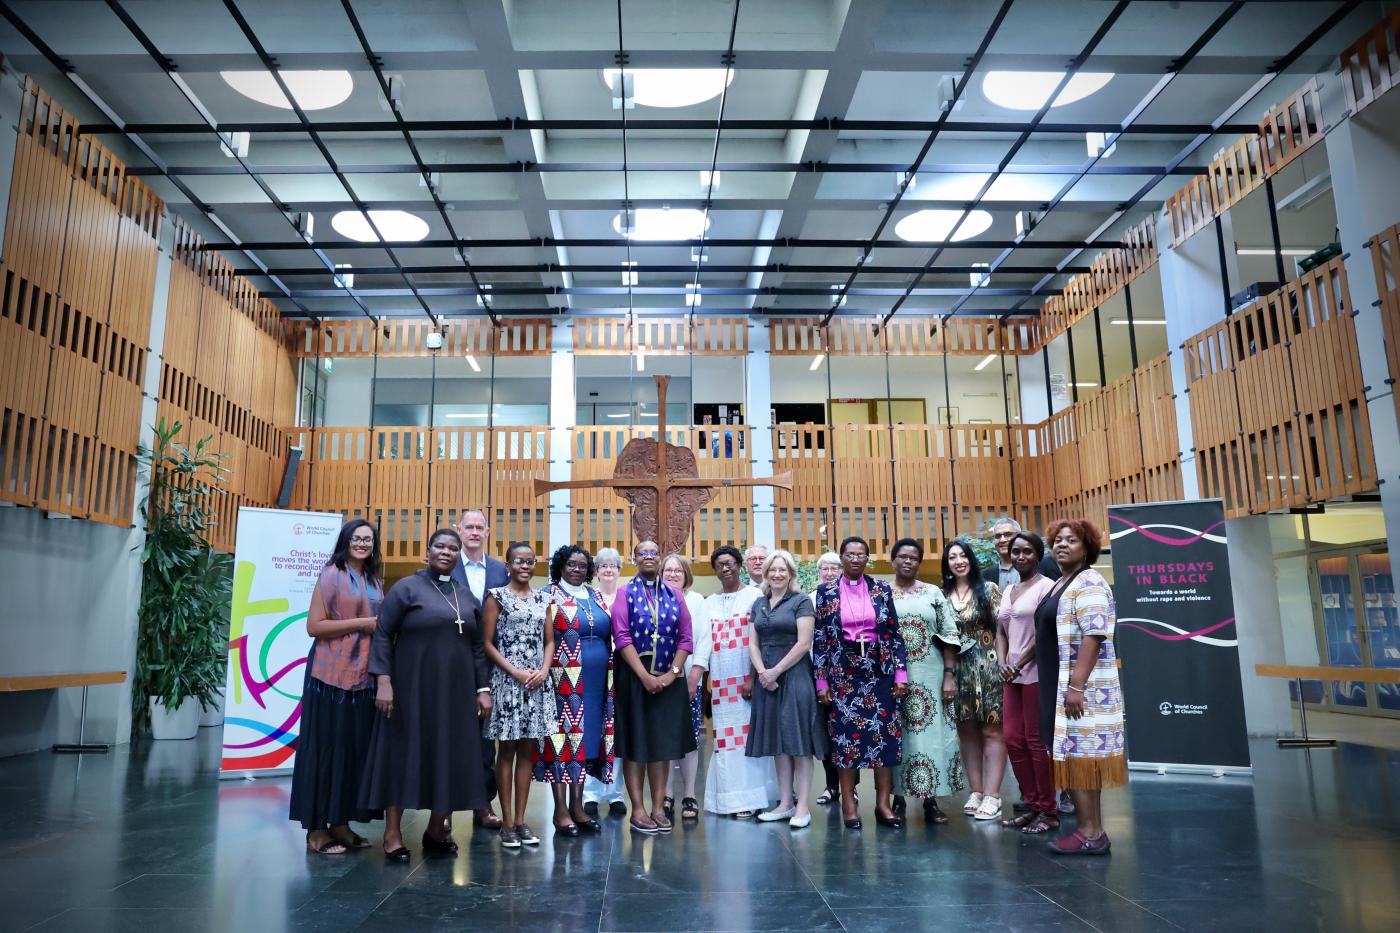 A group photo of the Women church leaders meeting at WCC, May 2022